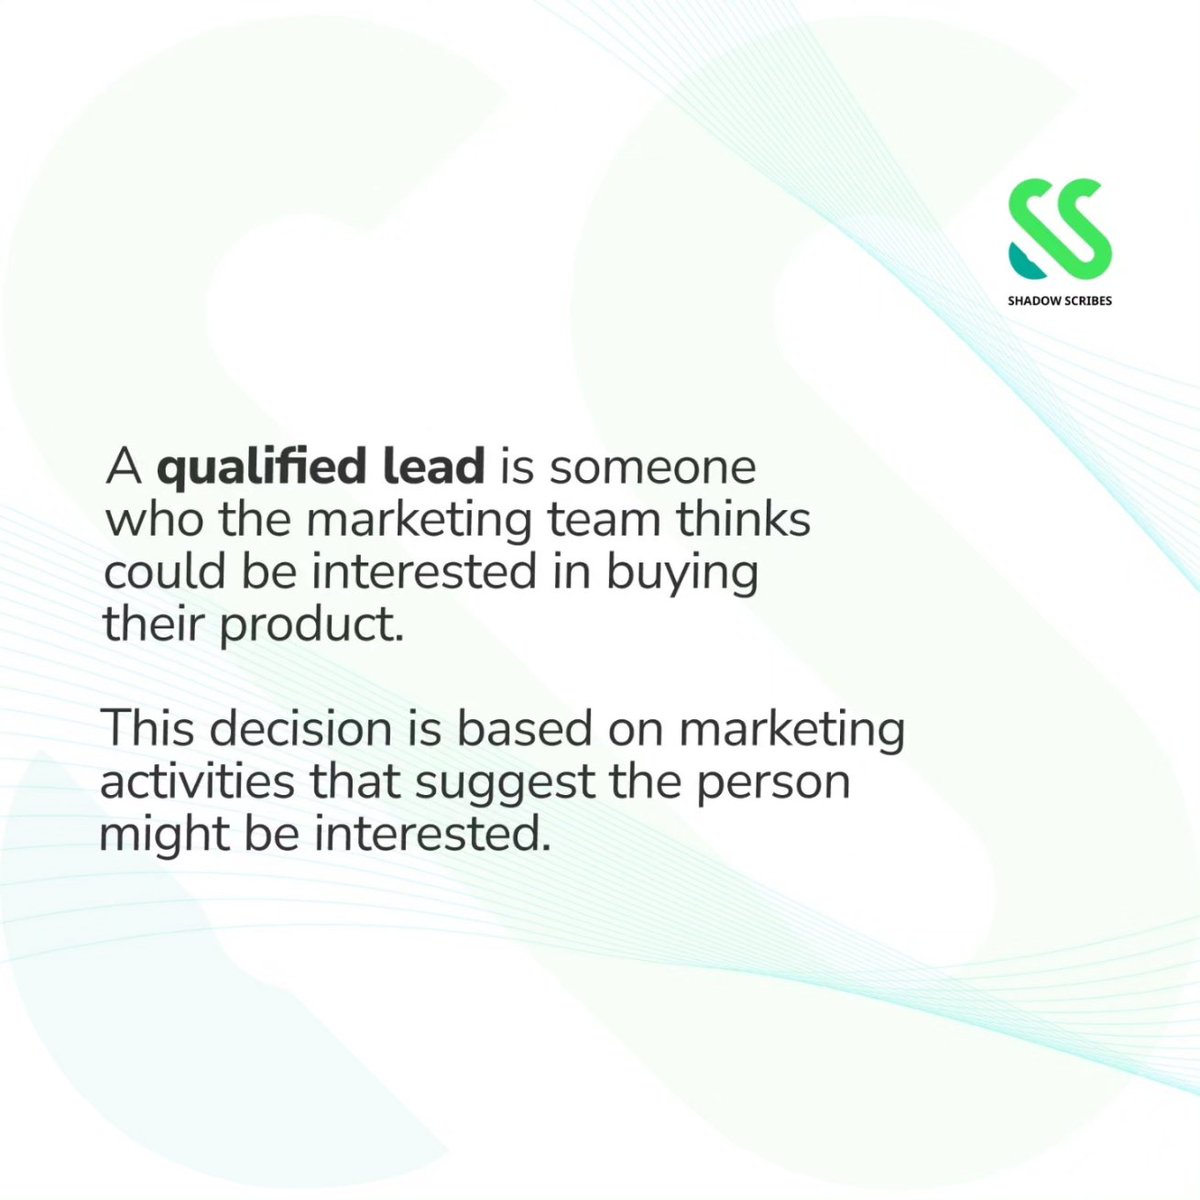 contacted, and be contacted by the marketing team for more enlightenment about your offering and their demands. 

A qualified lead is someone who has been contacted and examined to be a very serious or unserious prospect.

#marketingmonday
#ShadowScribes
#Marketing
#usa
#uk